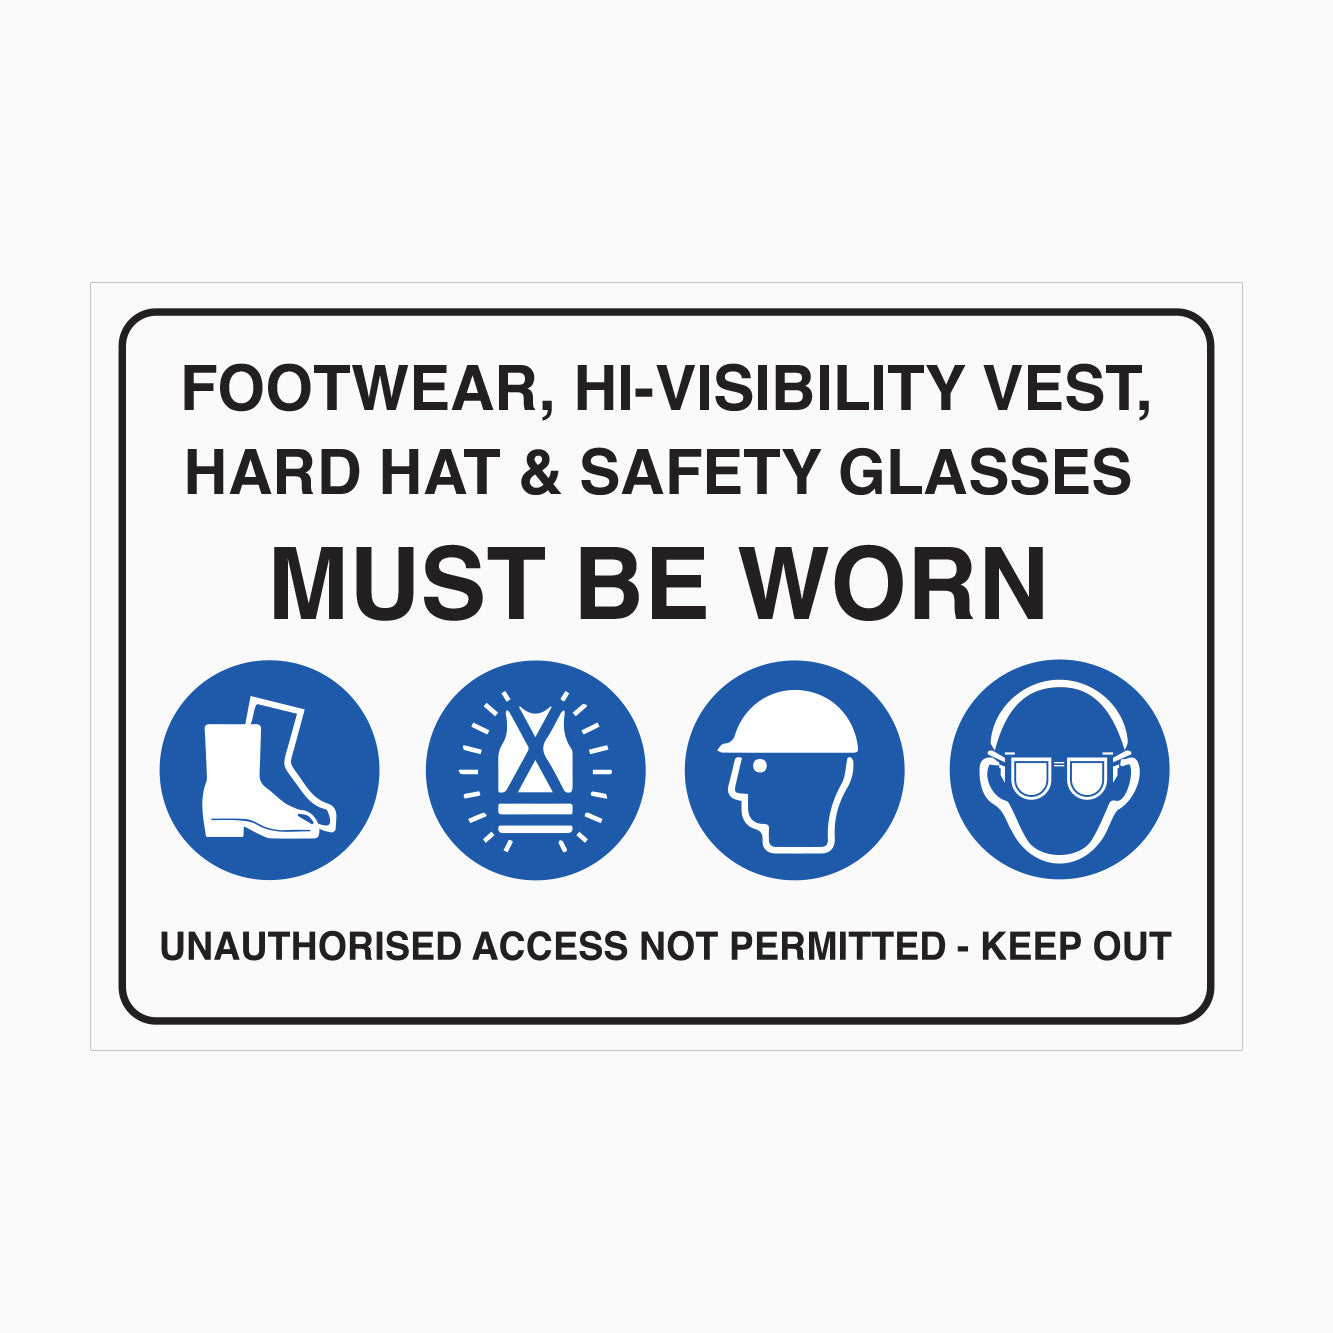 Mandatory Sign - This Protective Equipment Must Be Worn On This Site SIGN